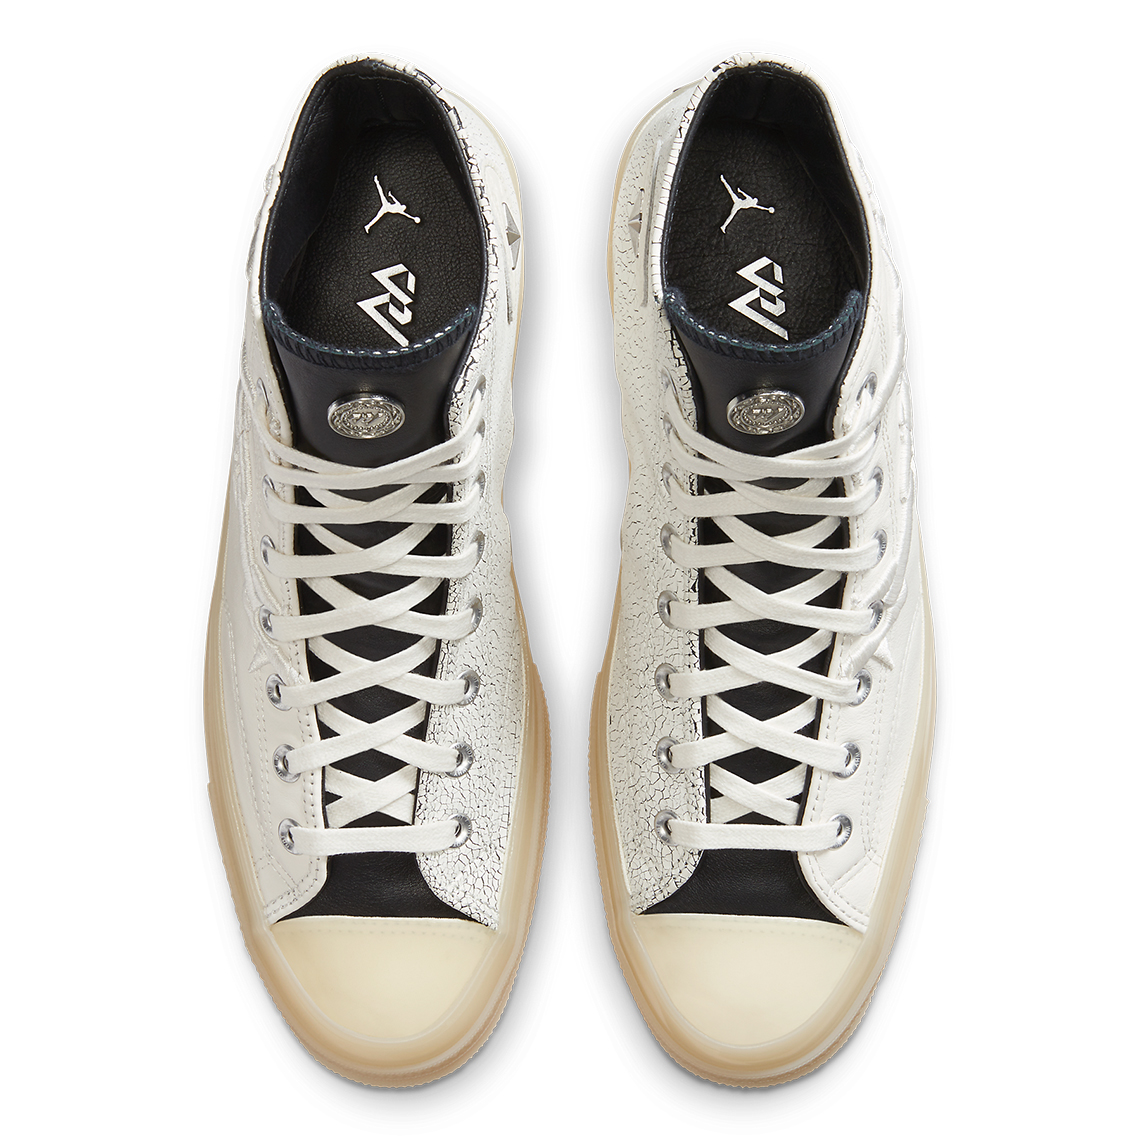 Russell Westbrook x Converse Chuck 70 “Why Not?”  aerial 